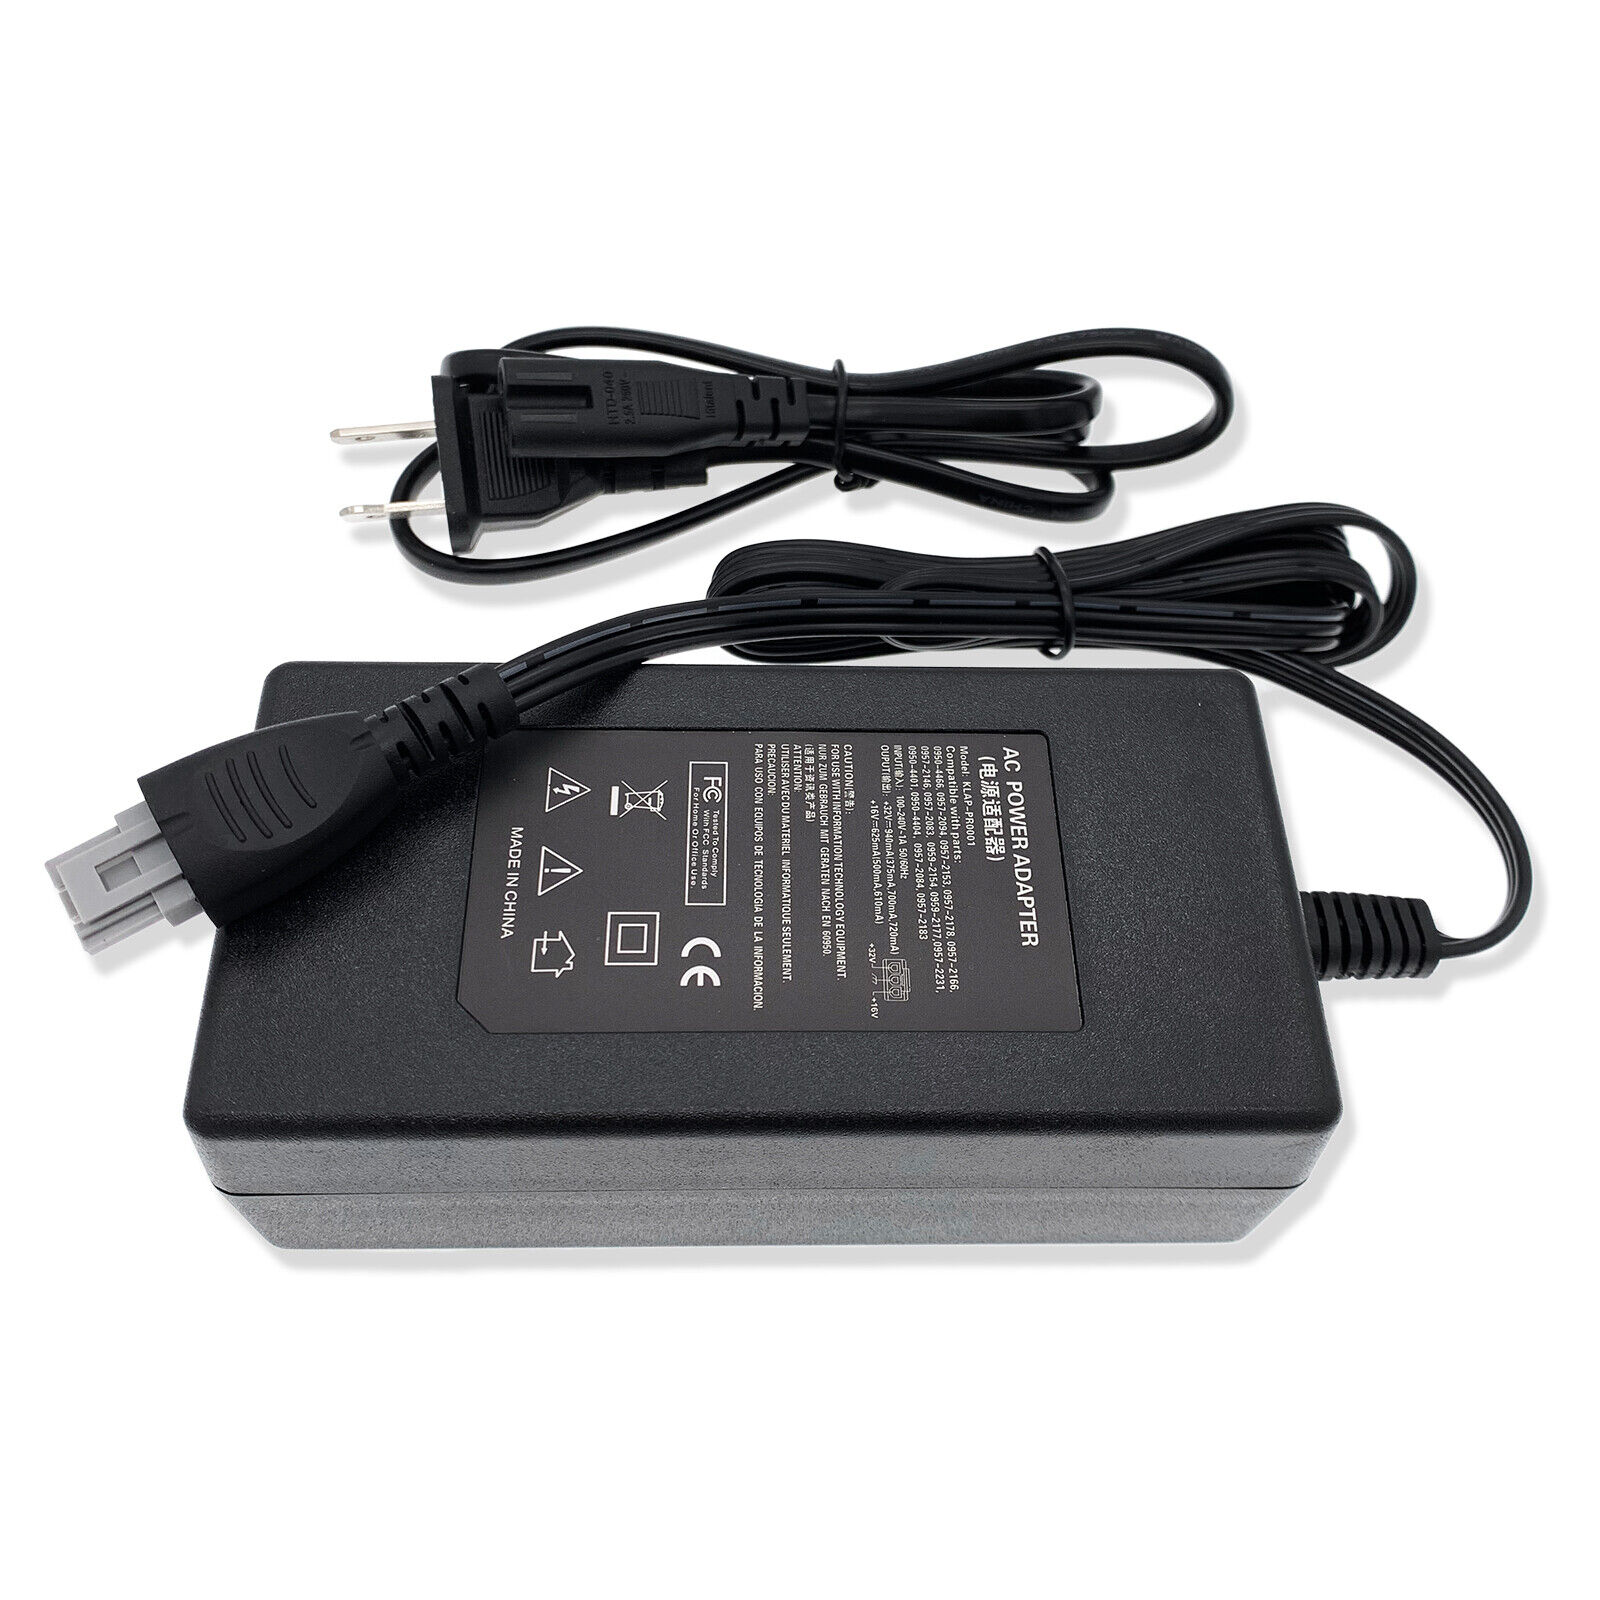 AC Adapter Charger For HP Photosmart C3140 C4180 0957-2094 PSC 1350 1510 1610